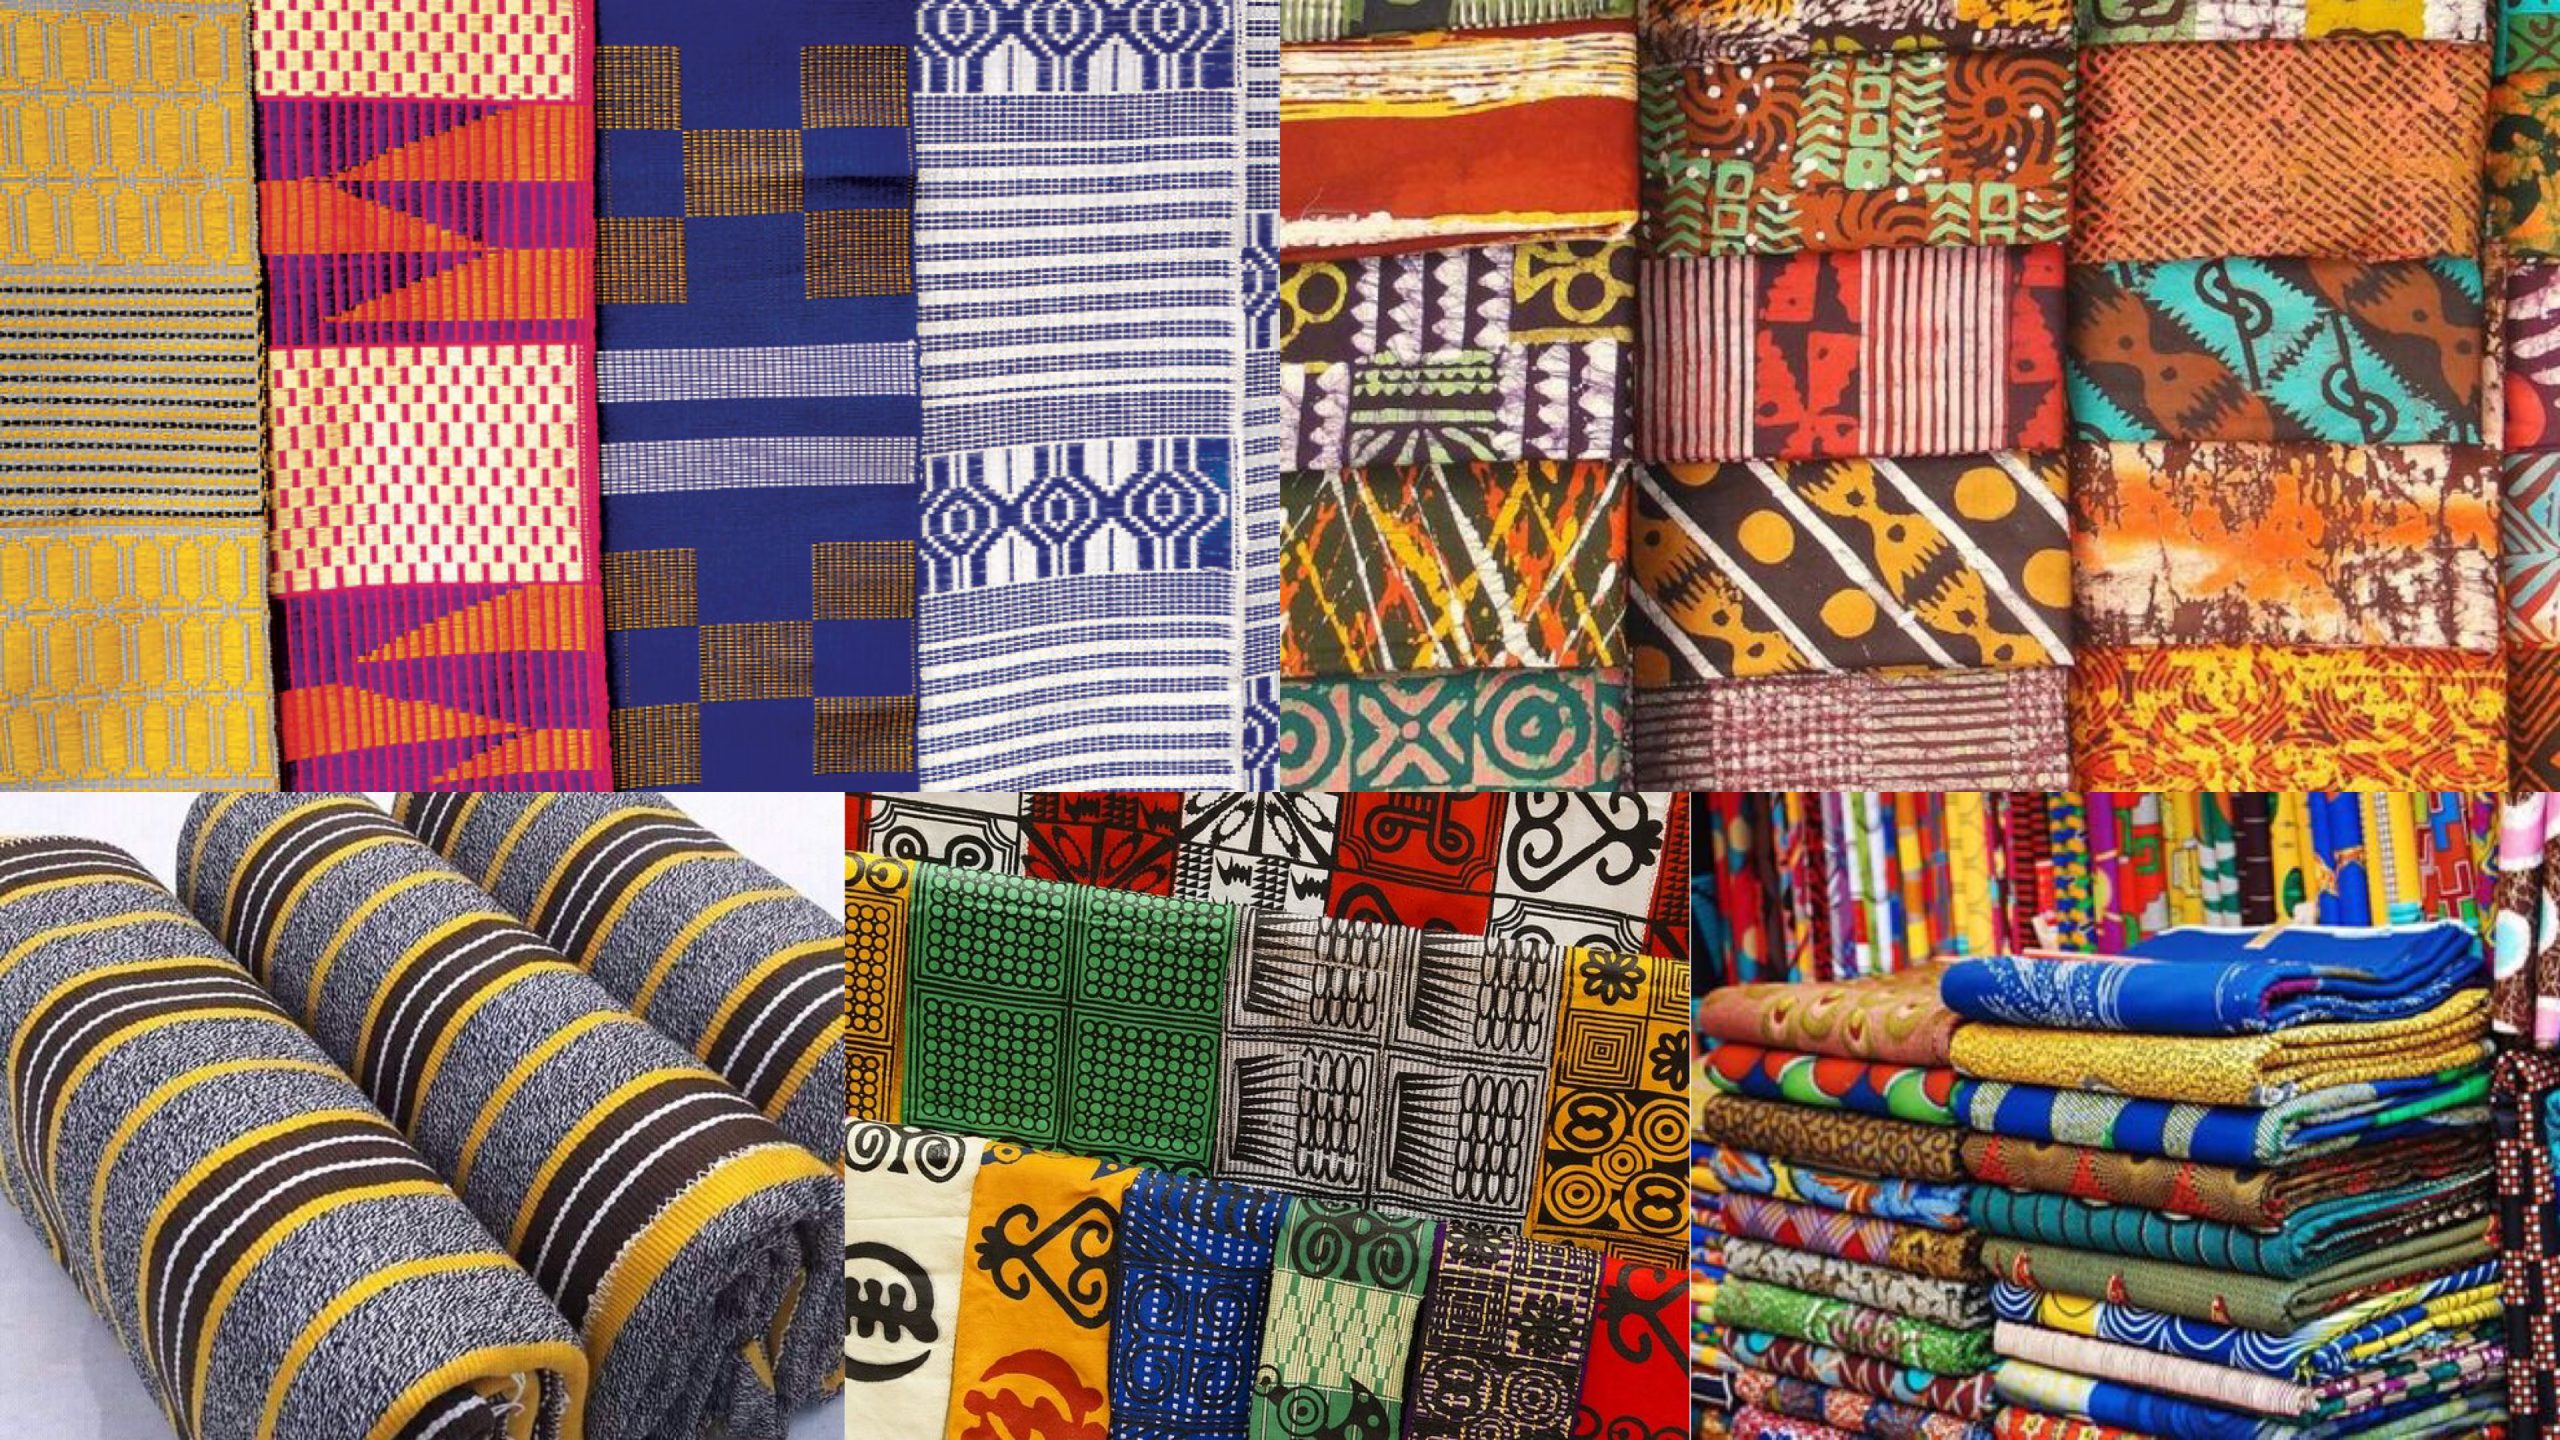 Names of Cloths Based on Weaving Patterns